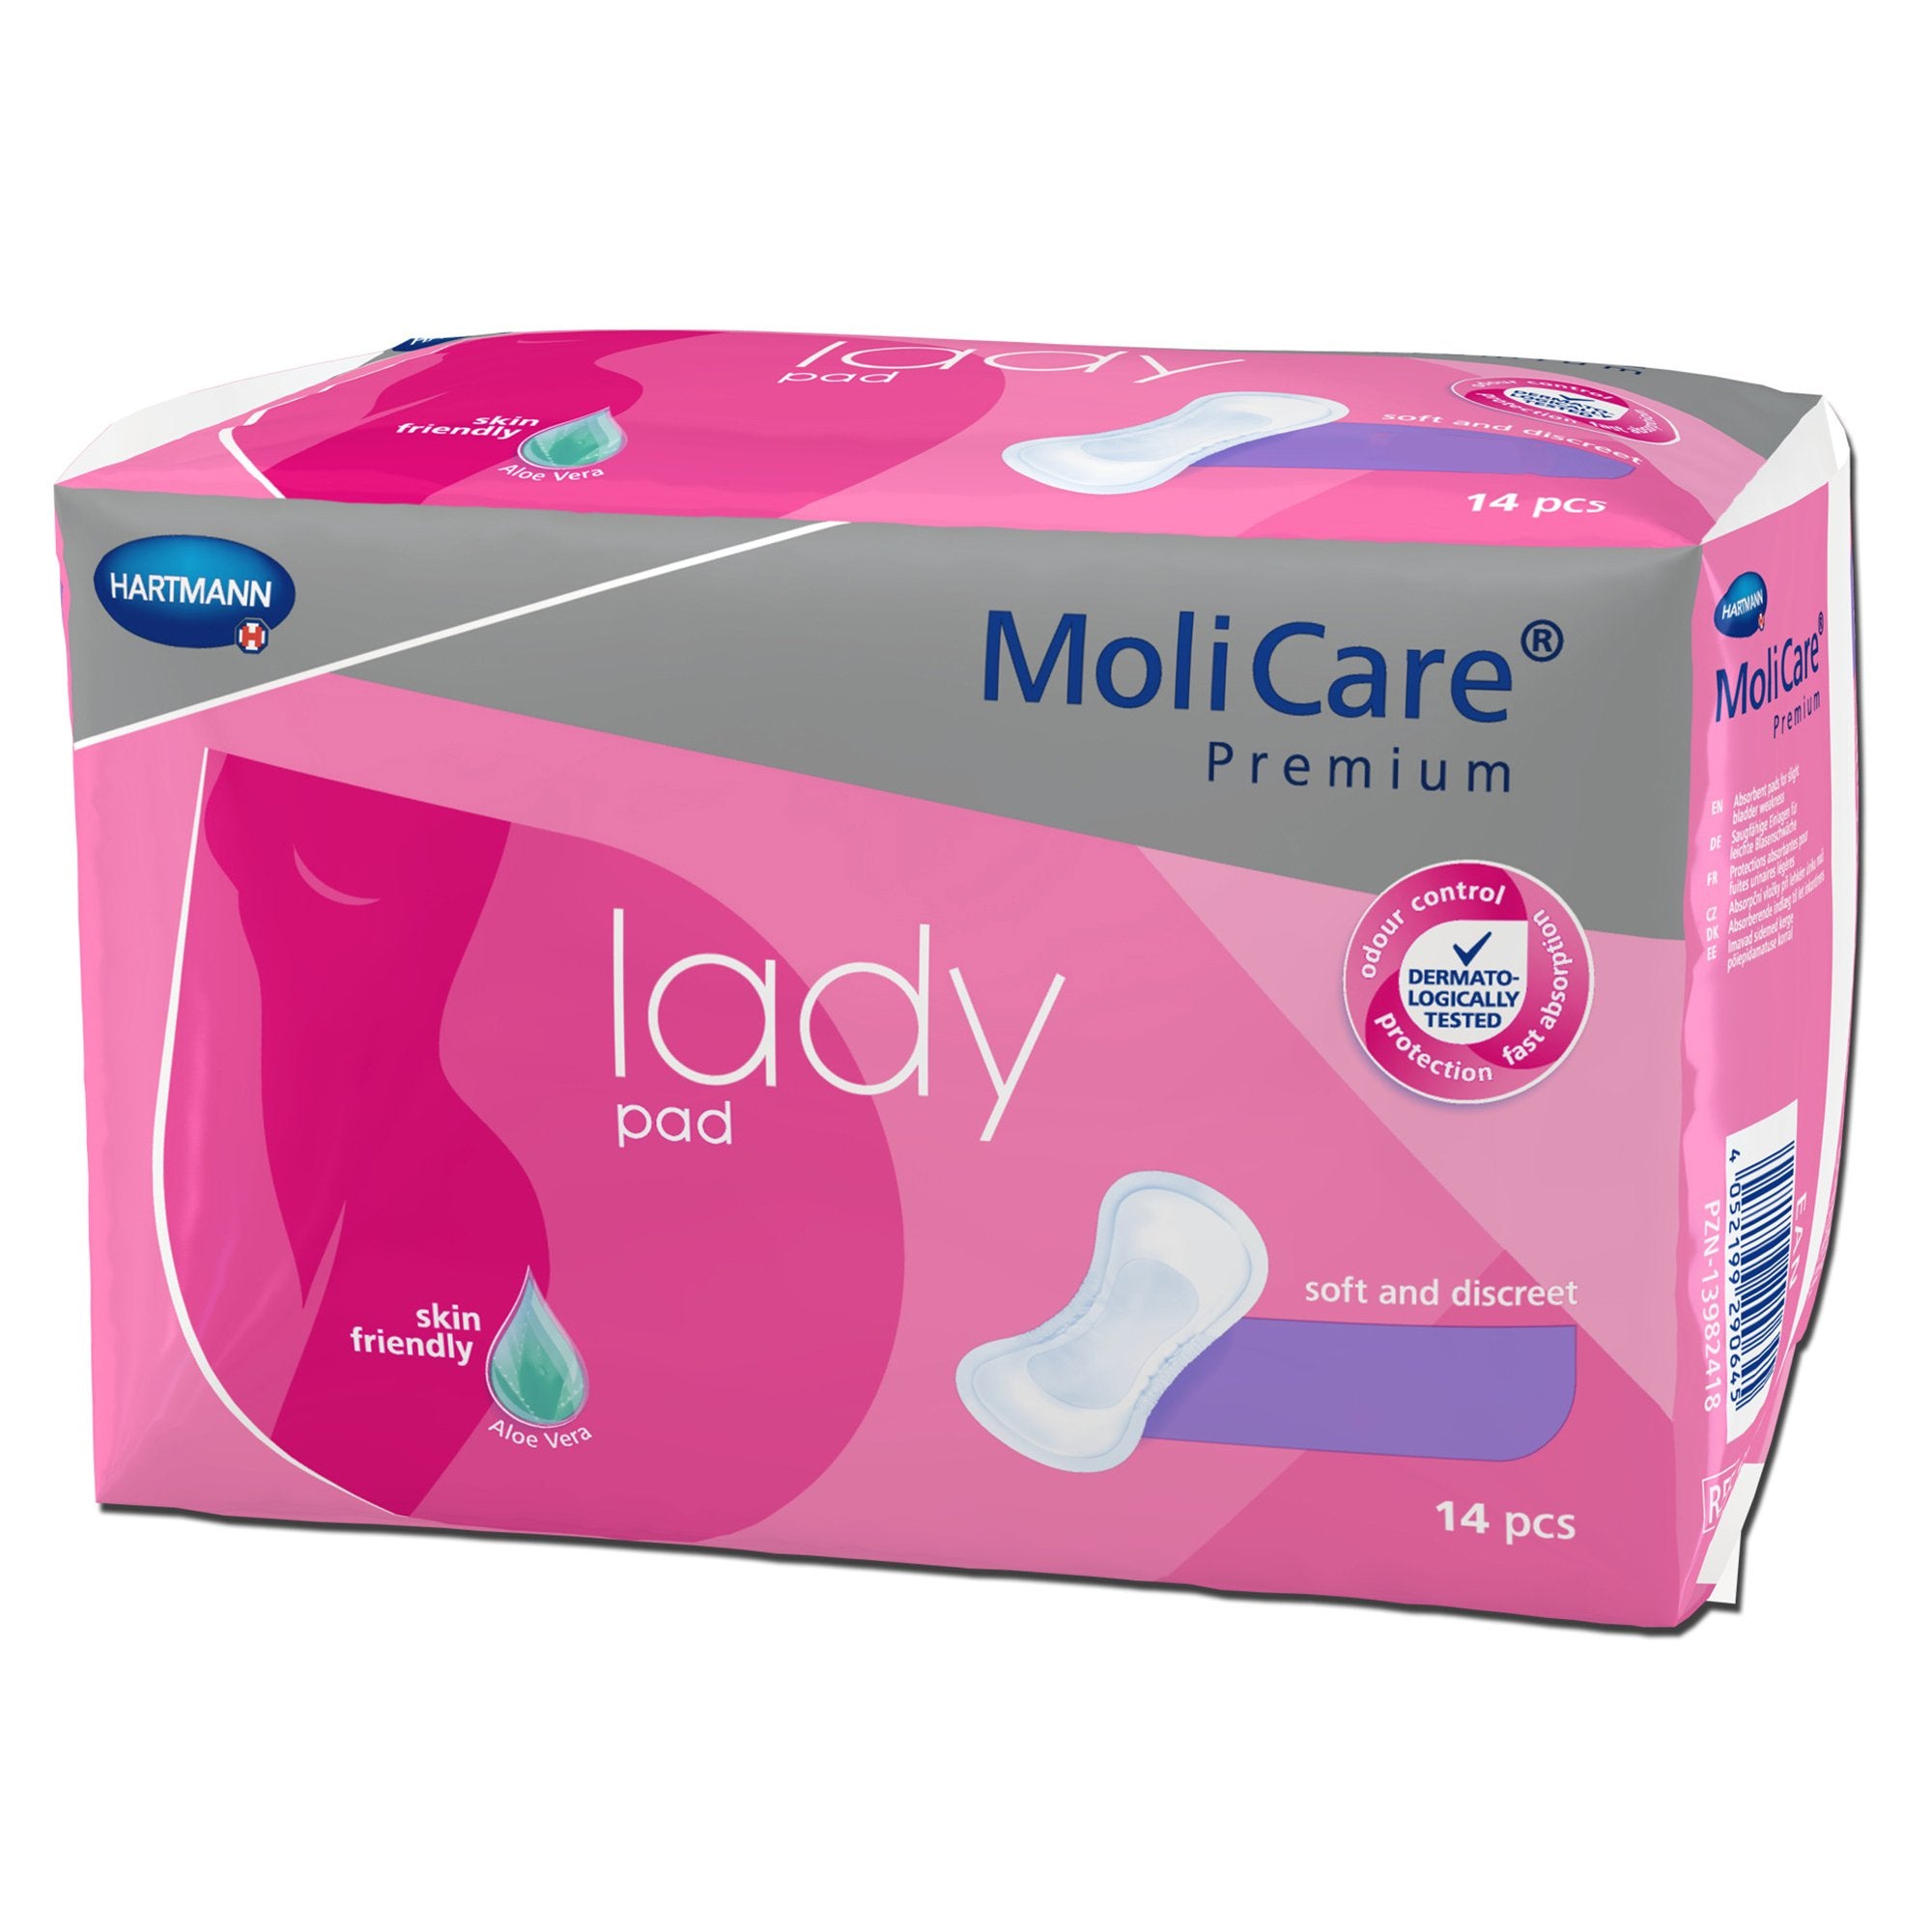 Bladder Control Pad MoliCare® Premium Lady Pads 3 X 8-1/2 Inch Light Absorbency Polymer Core One Size Fits Most